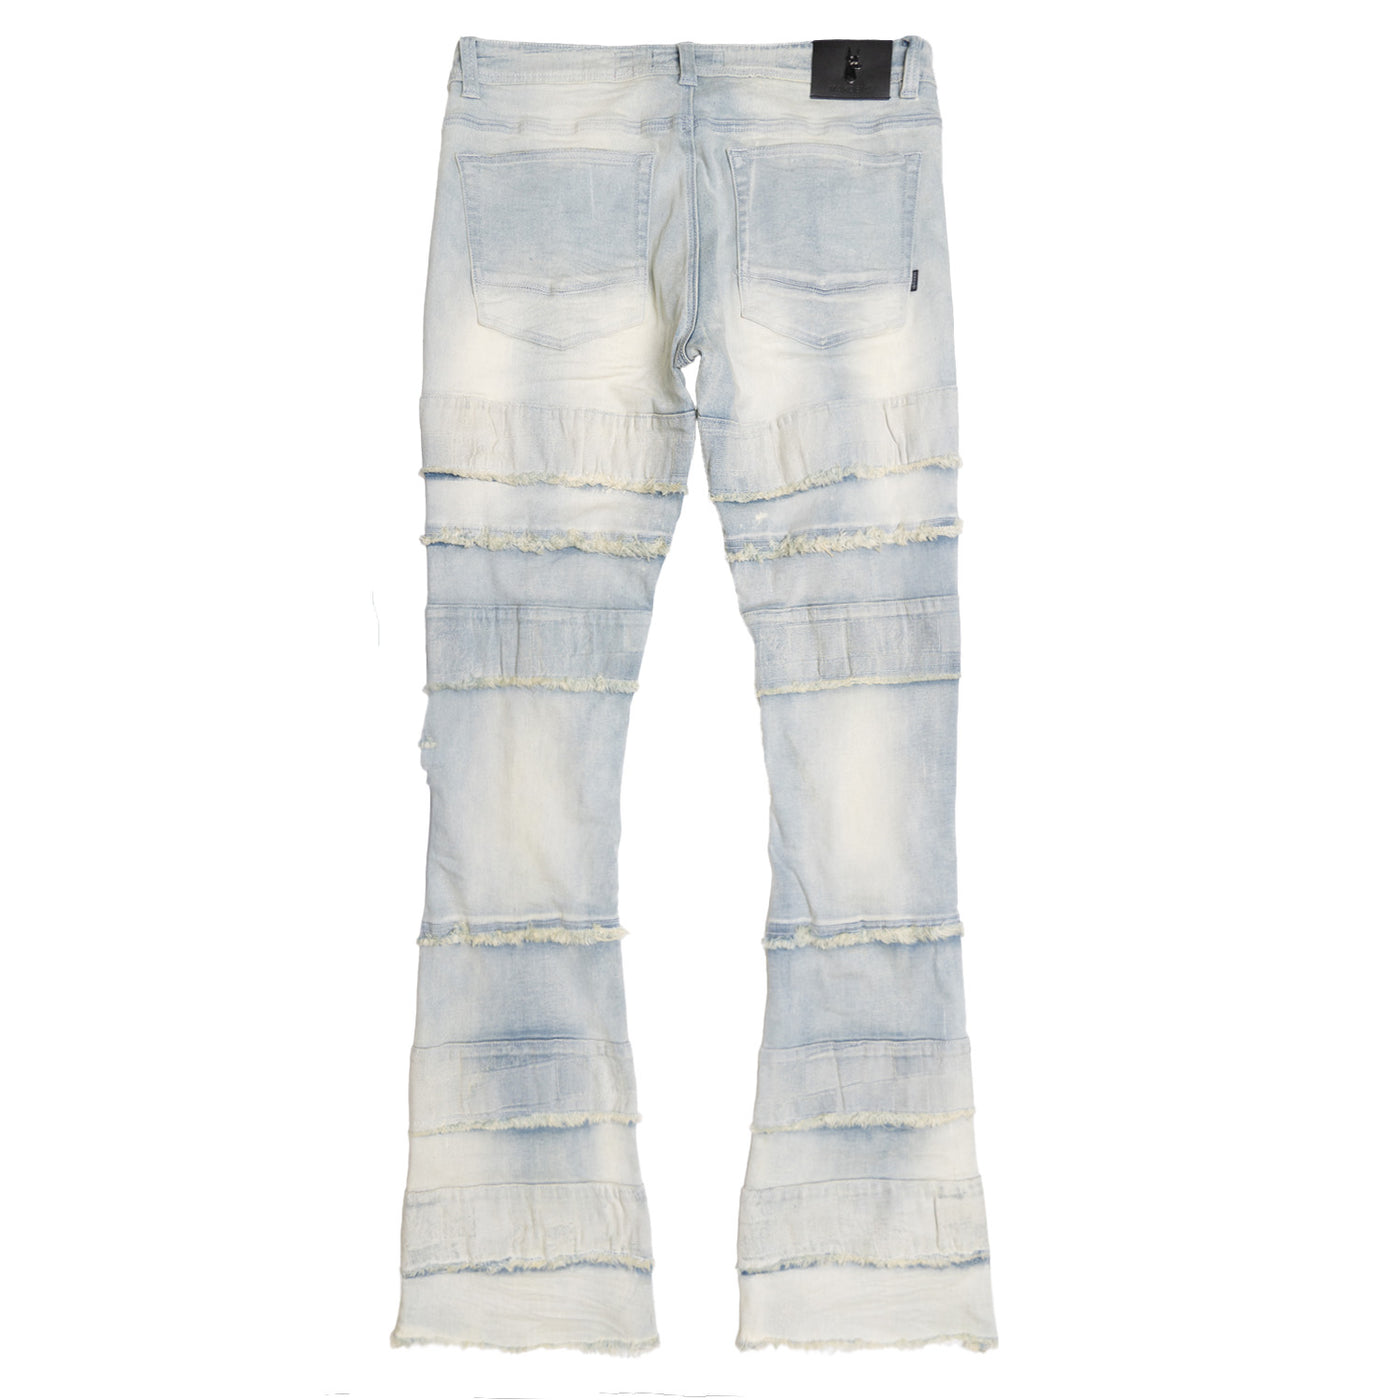 M1951 Bianchi Stacked Jeans - Light Wash